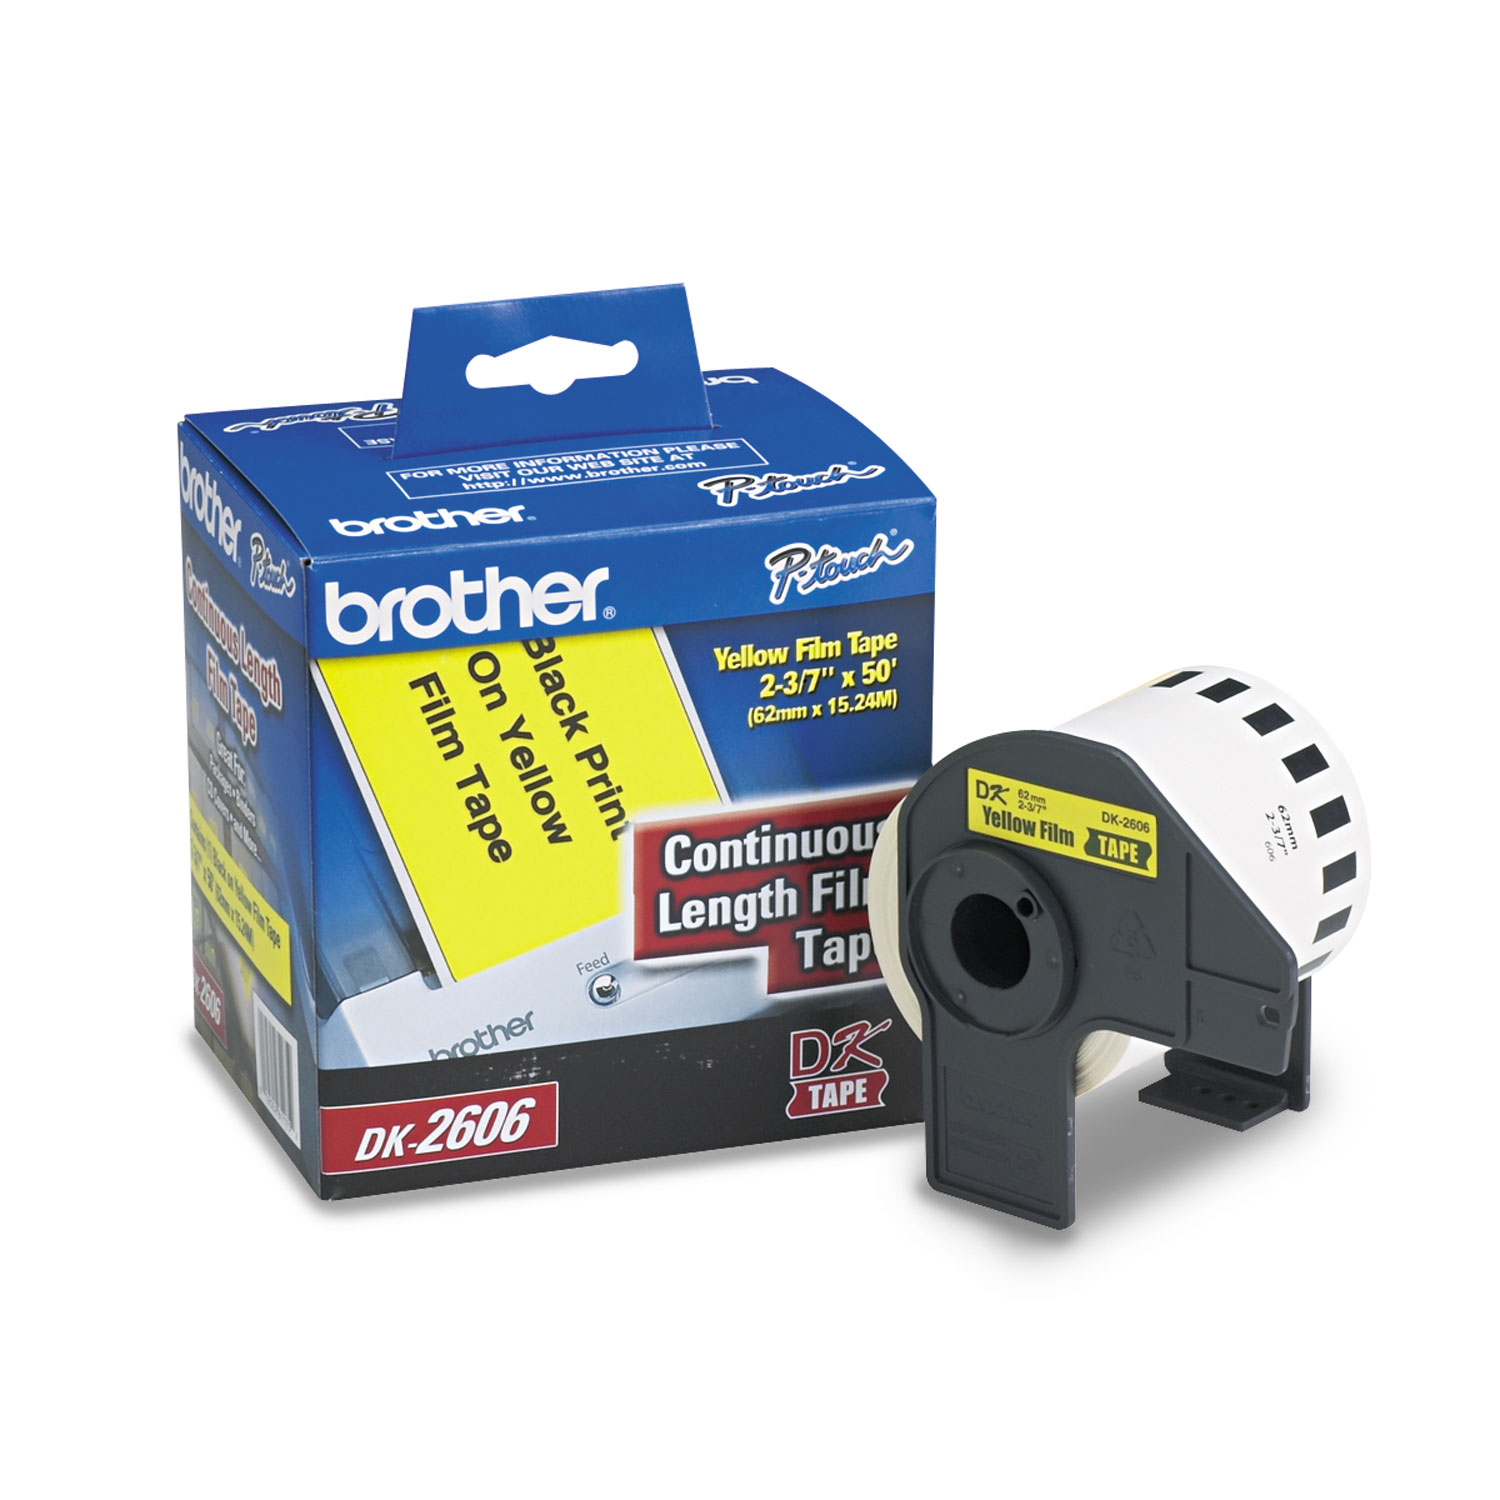  Brother DK2606 Continuous Film Label Tape, 2.4 x 50 ft Roll, Yellow (BRTDK2606) 